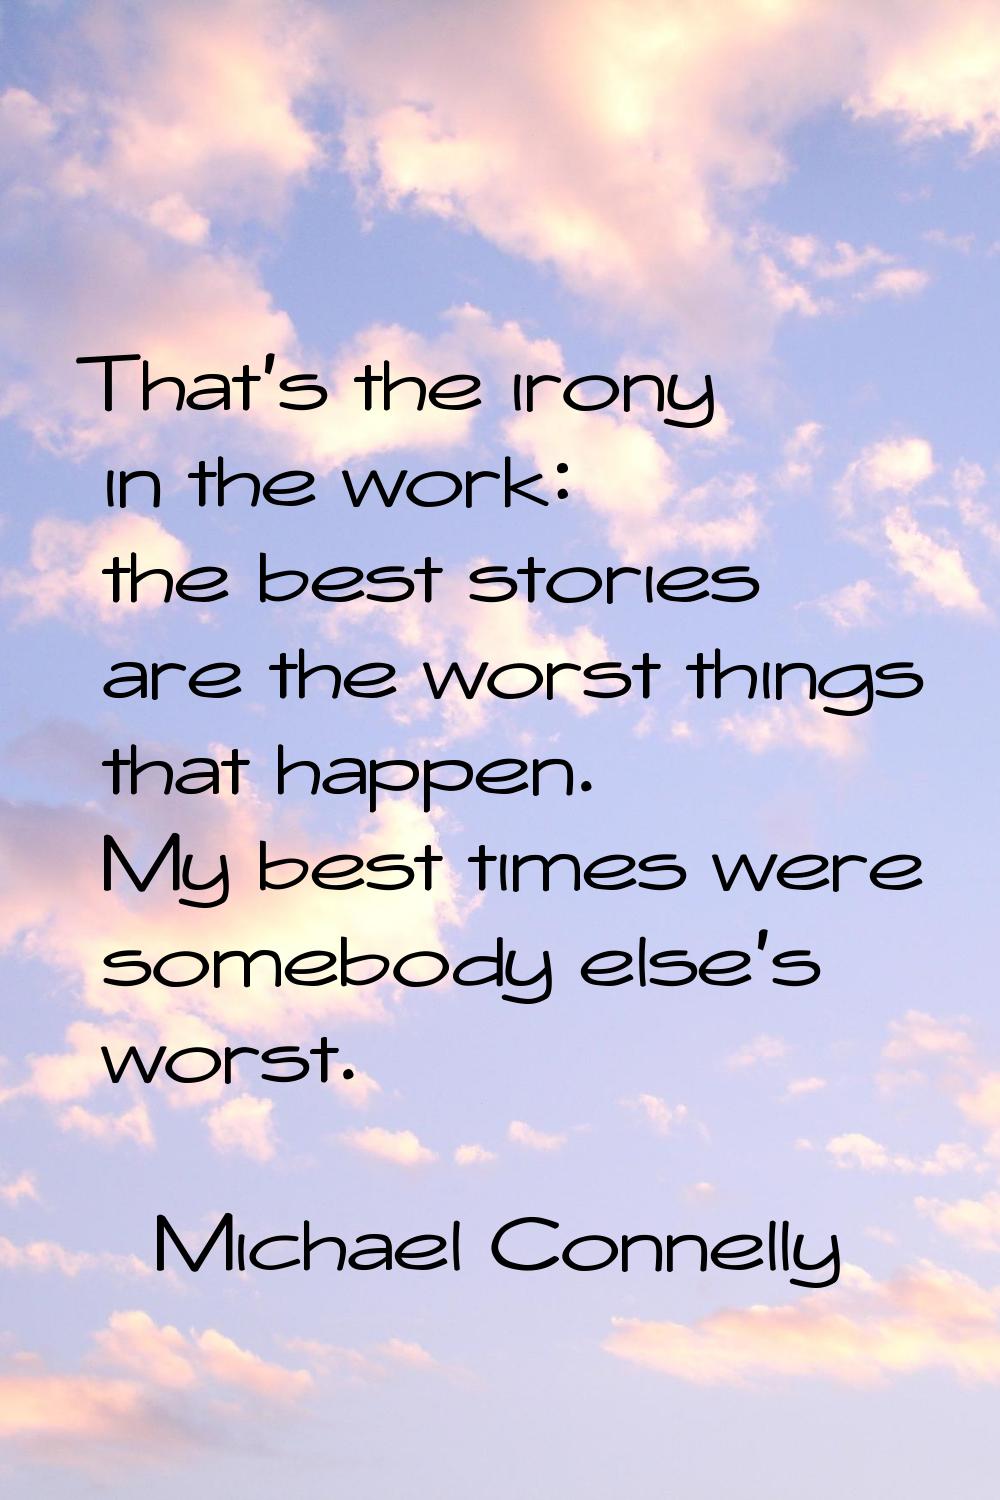 That's the irony in the work: the best stories are the worst things that happen. My best times were